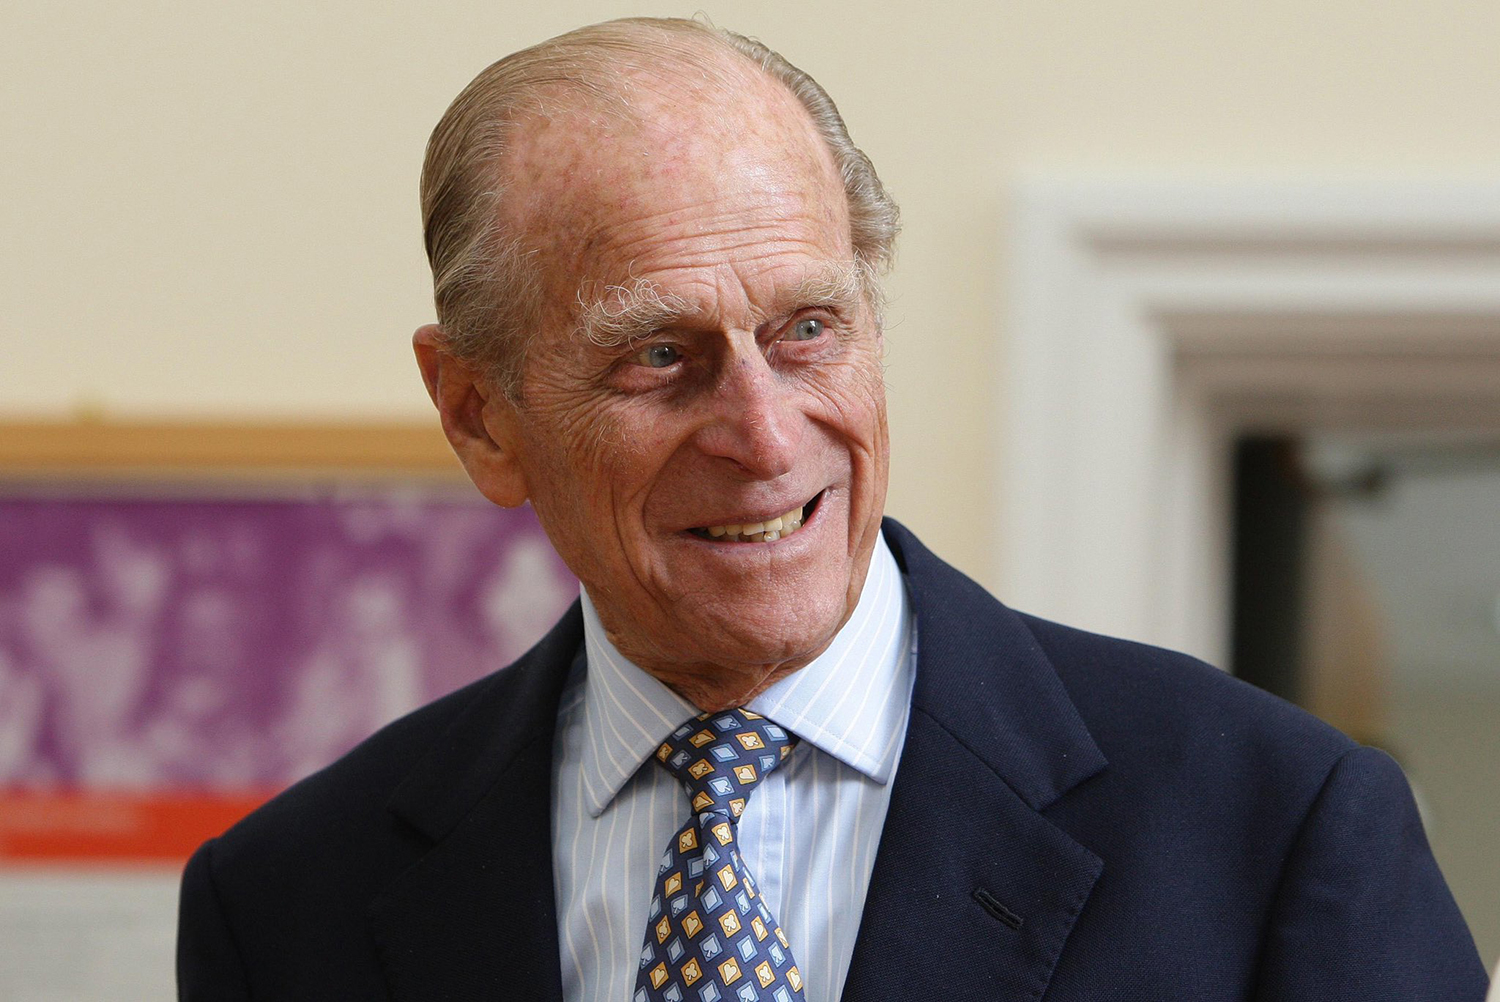 World Leaders Honor Prince Philip's Legacy: He 'Embodied a Generation We Will Never See Again'